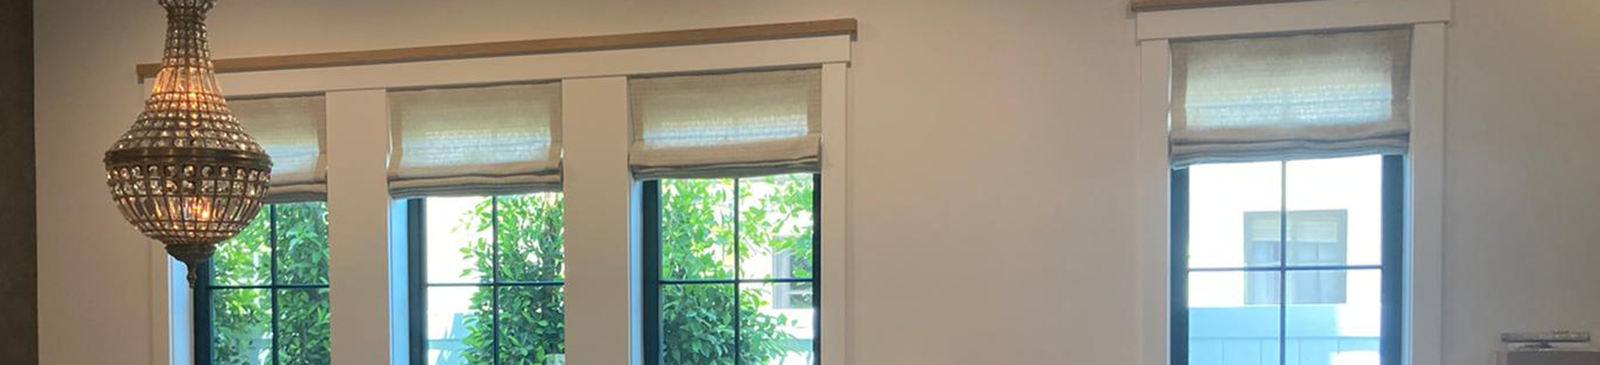 Cellular Window Shades for Mountain View Home